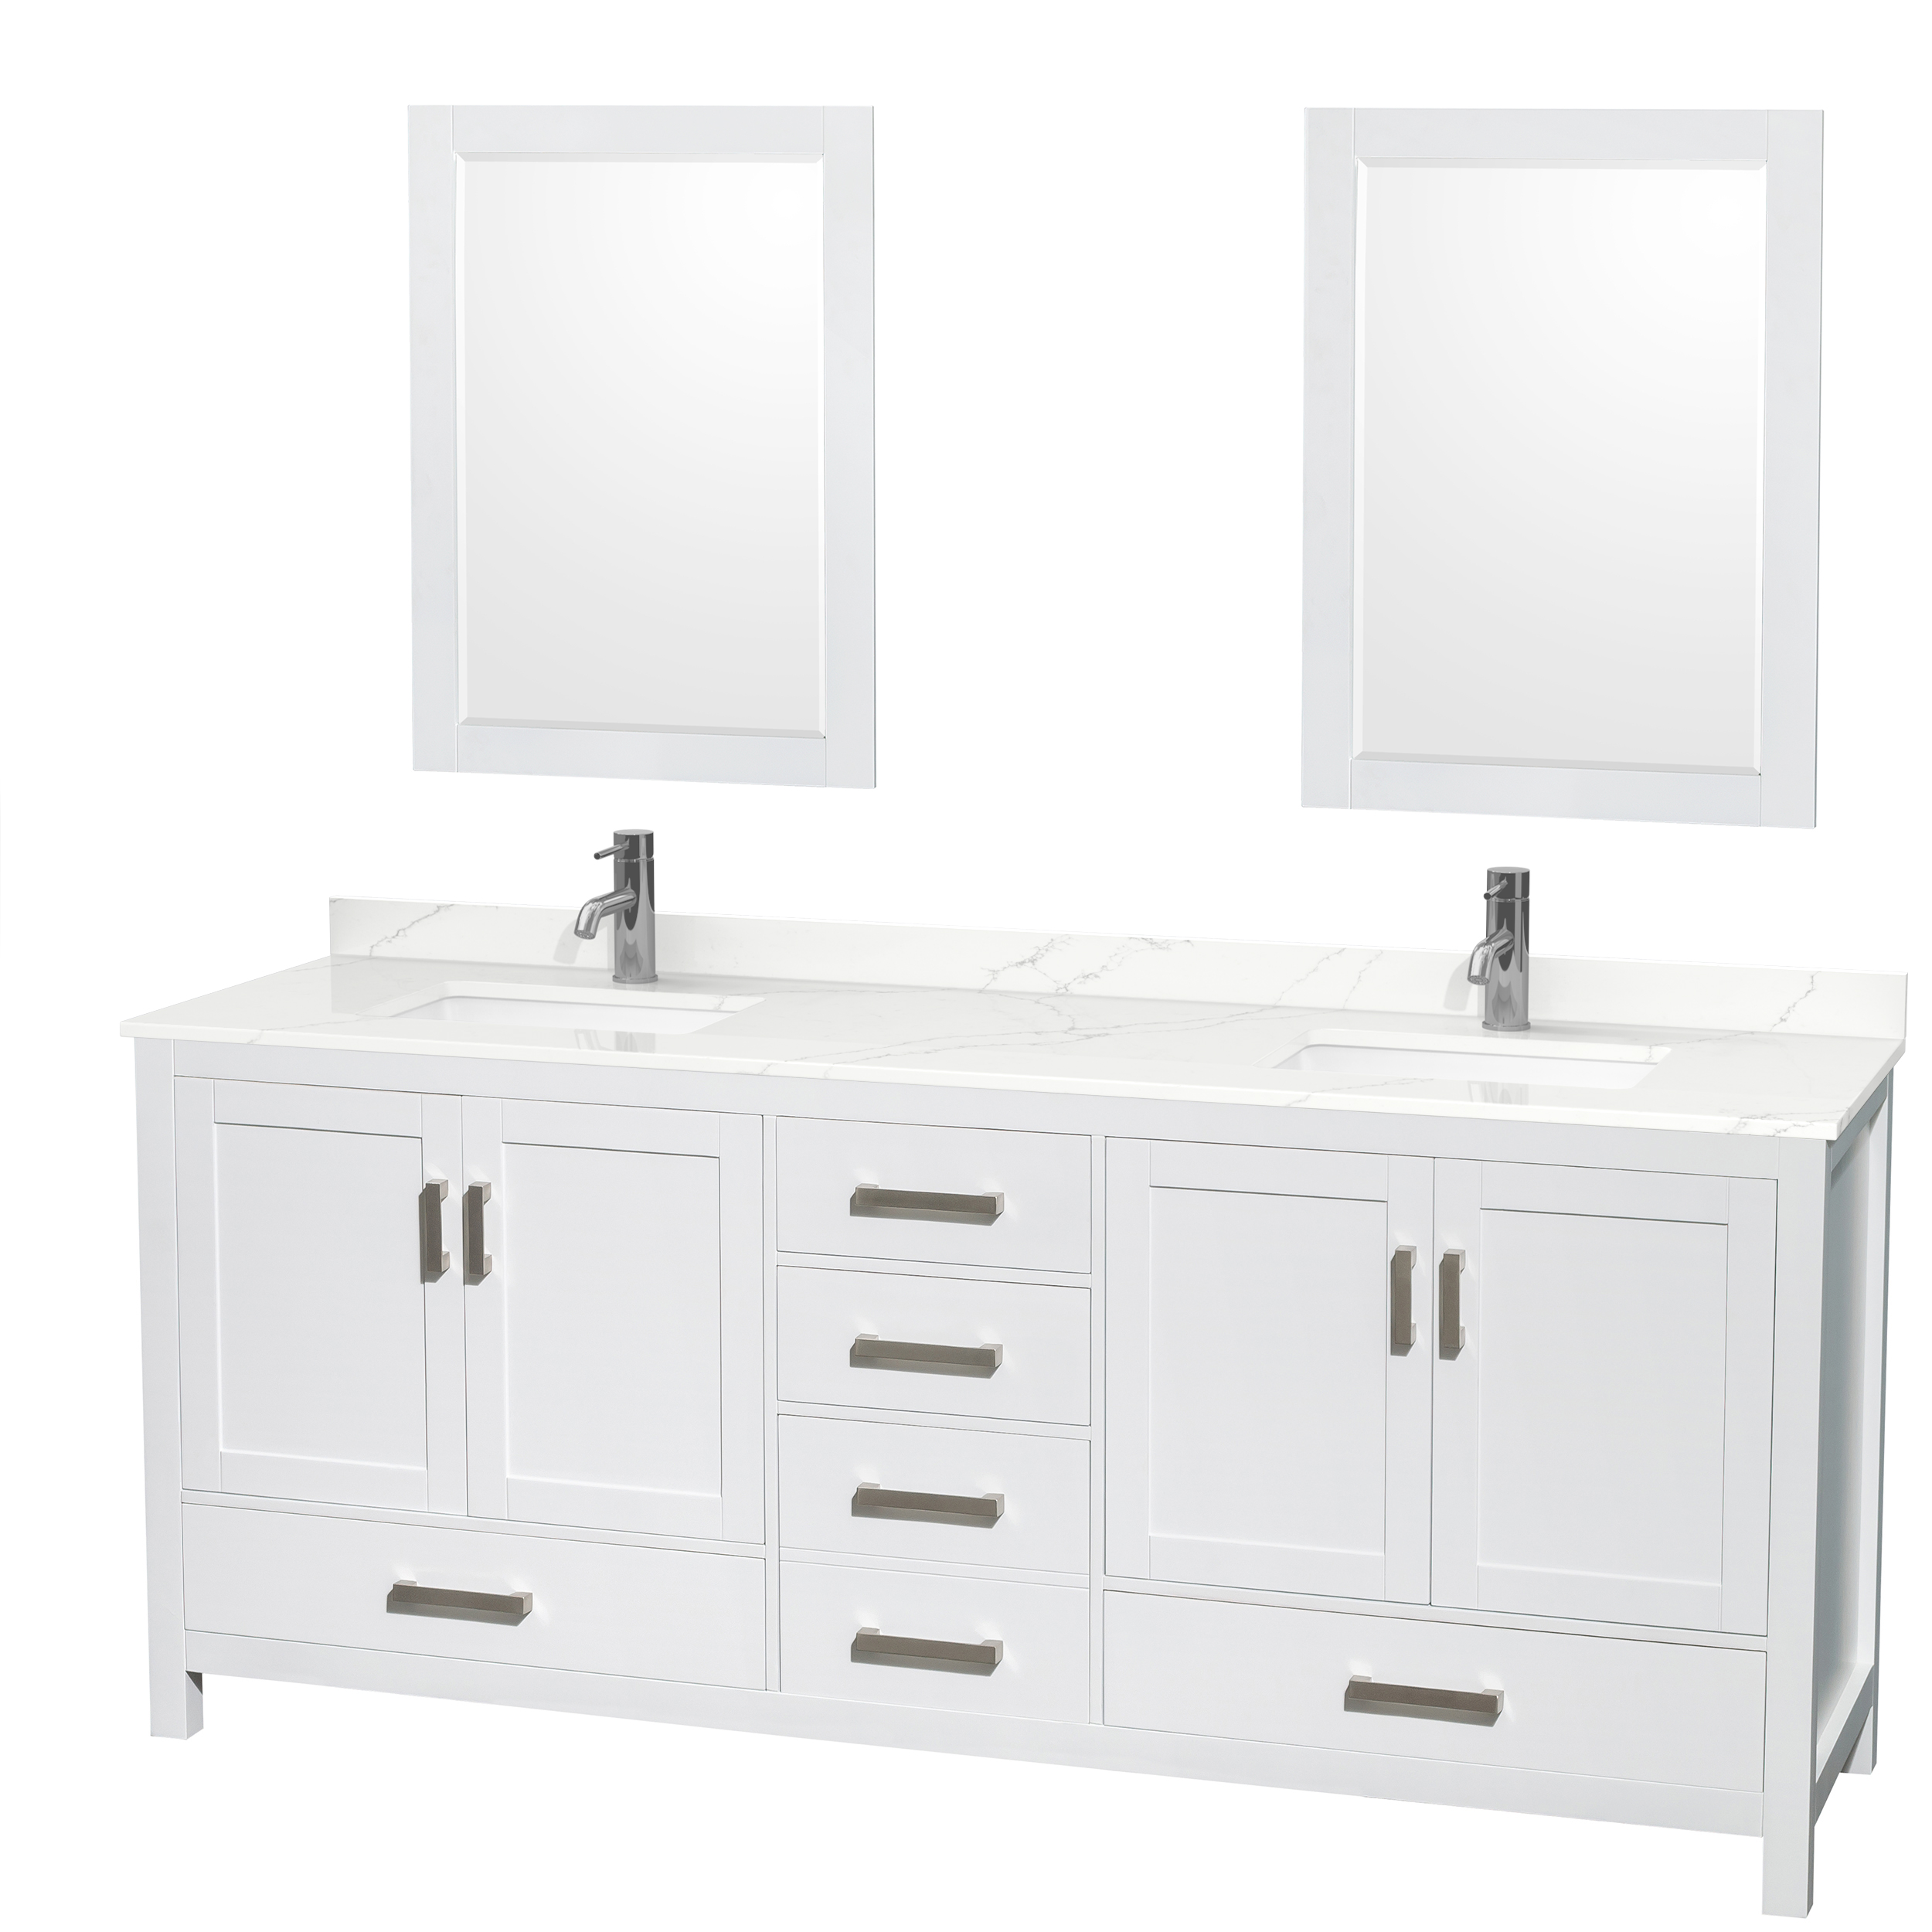 Sheffield 80" Double Bathroom Vanity by Wyndham Collection - White WC-1414-80-DBL-VAN-WHT-